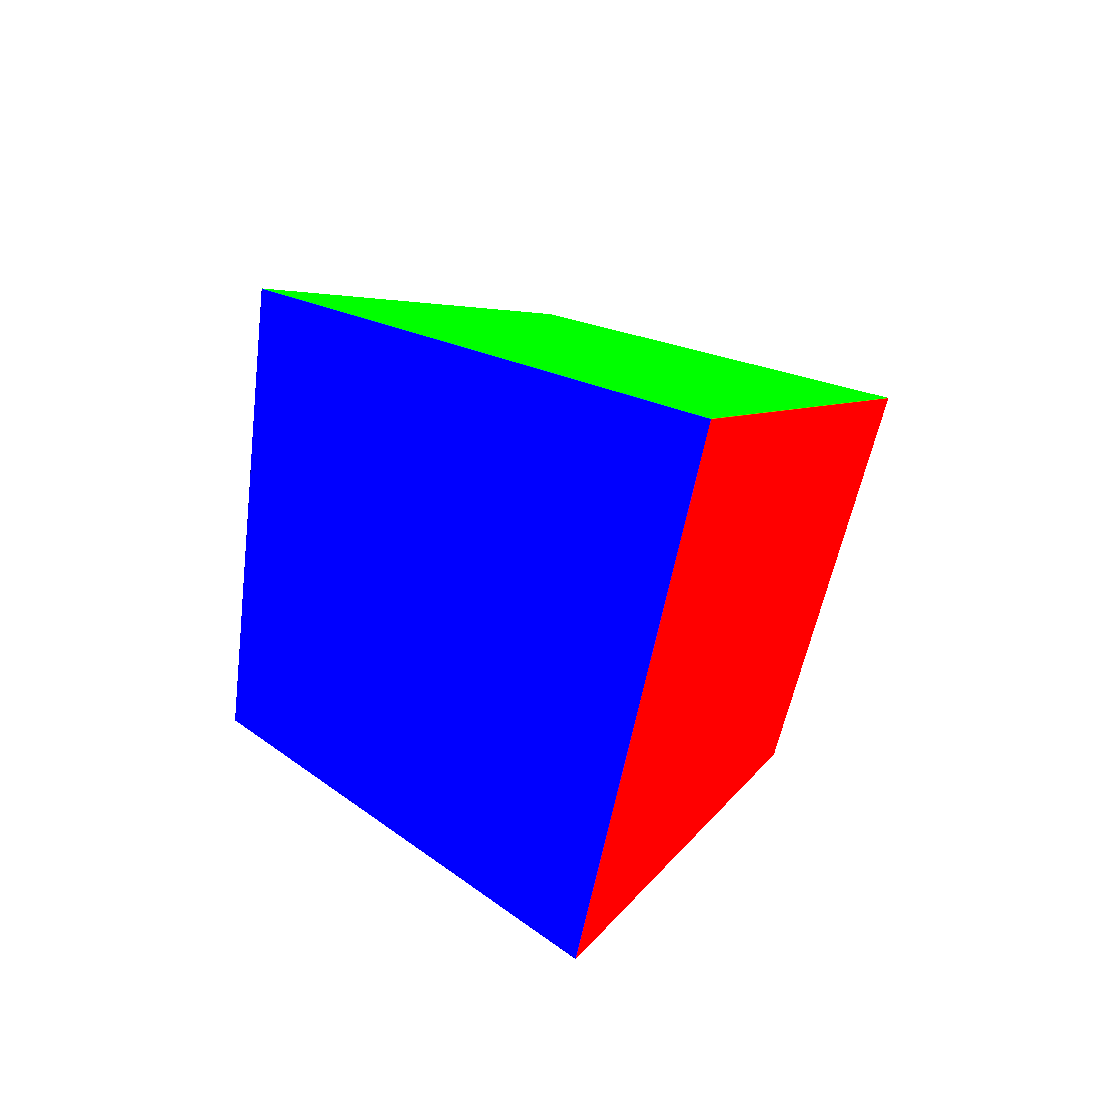 3D cube created with a fragment shader